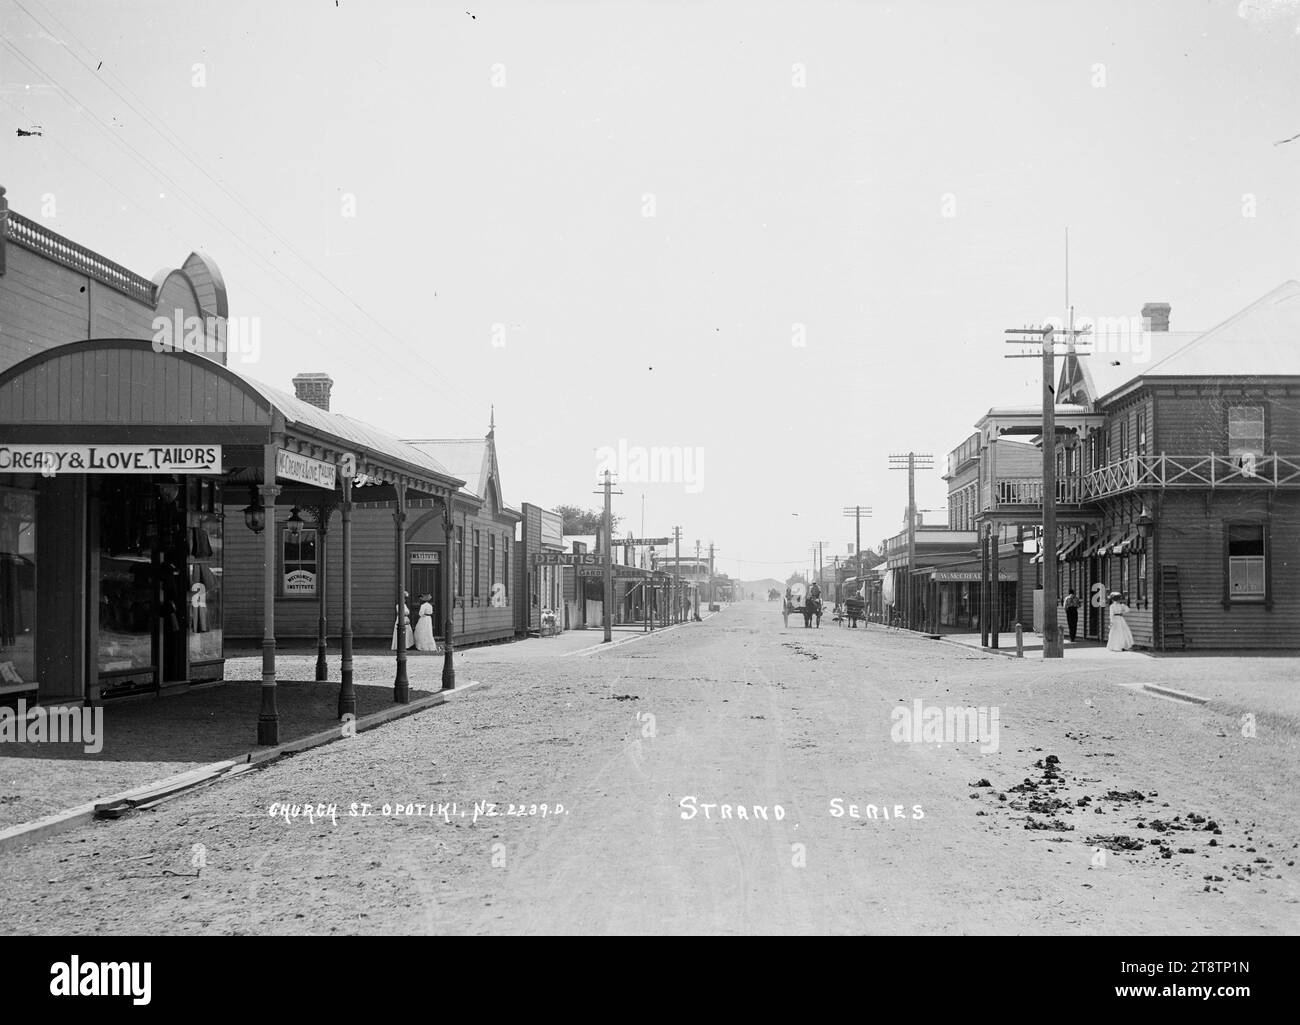 Church Street, Opotiki, View looking down Church Street (now known as Elliot Street) with the Royal Hotel on the right; McCready & Love (tailors), Mechanics Institute; dentist, saddler, and other businesses on the left. The Masonic Hotel can be seen in the far distance on the left. Two women are standing at the entrance to the Mechanics Institute; a pram is on the footpath outside the dentist; a horse and cart are heading towards the photographer in early 1900s Stock Photo